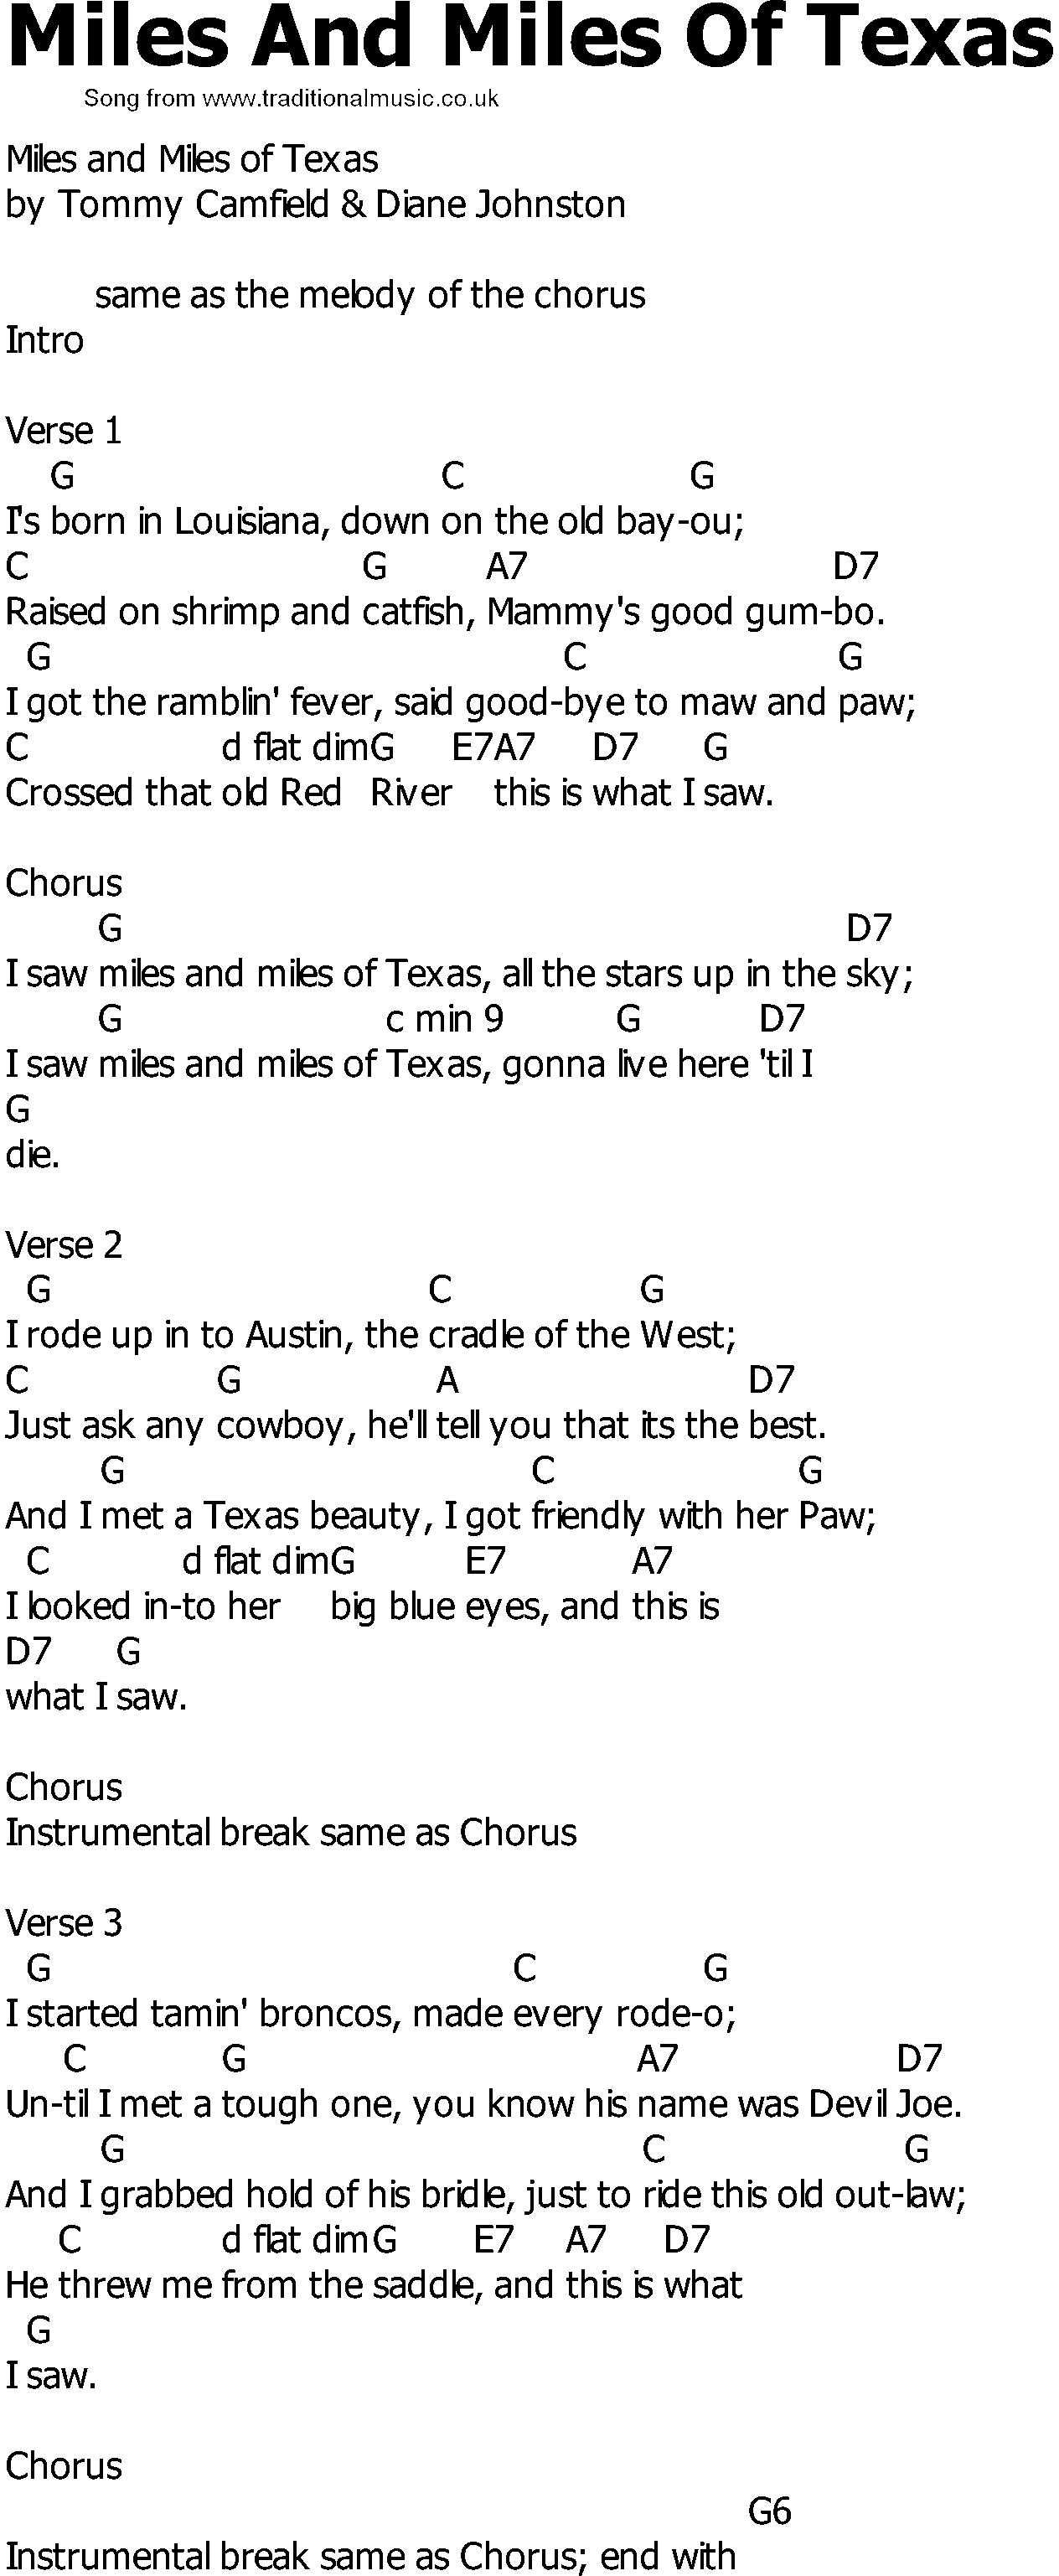 Old Country song lyrics with chords - Miles And Miles Of Texas